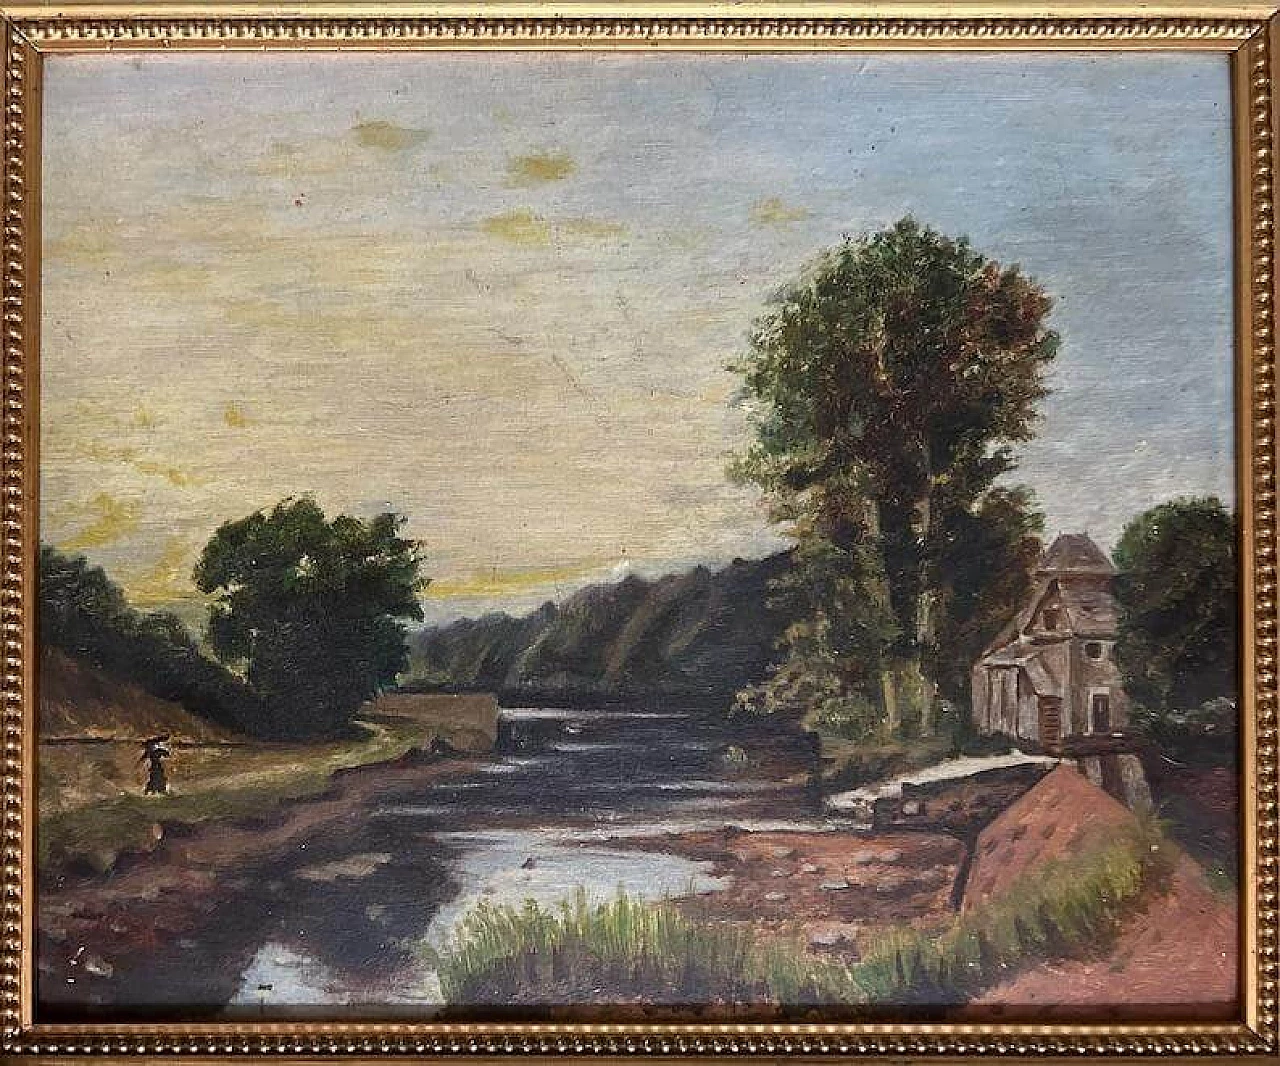 Lake landscape in the style of the Barbizon School, painting, 1920s 12